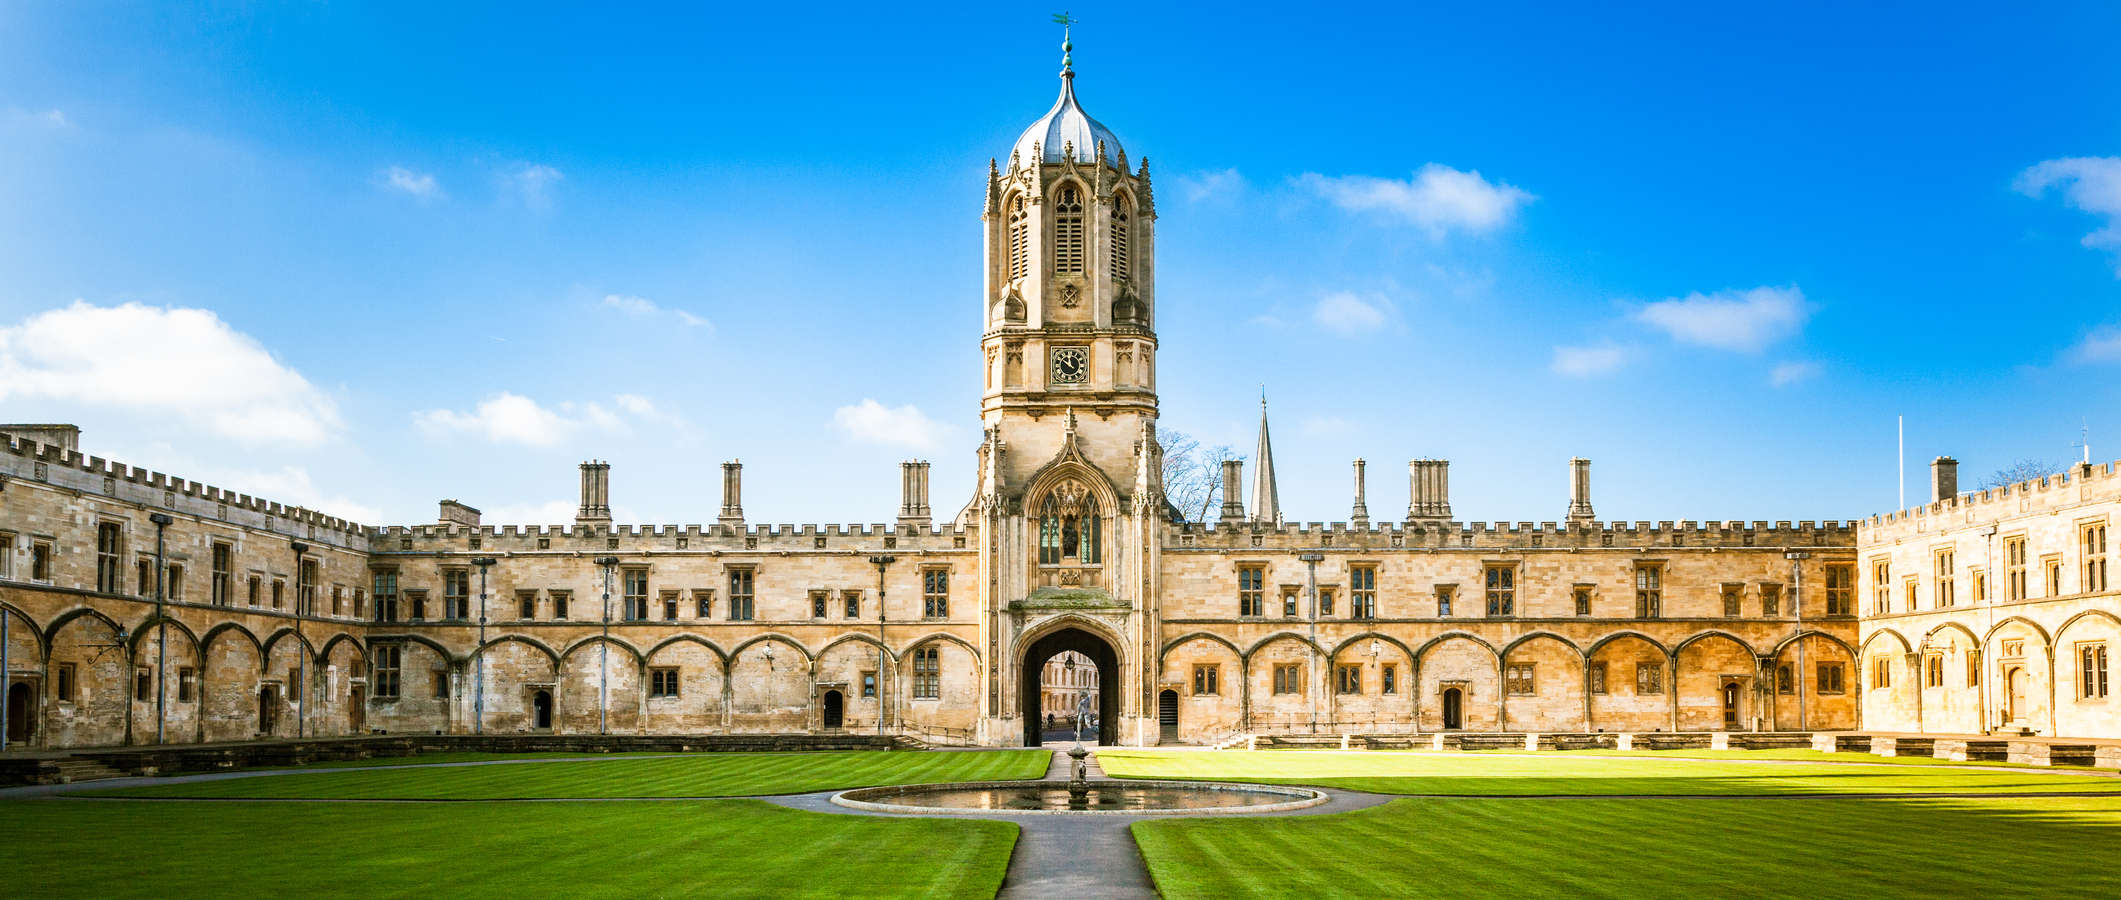 Tom Tower at Christchurch College, Oxford